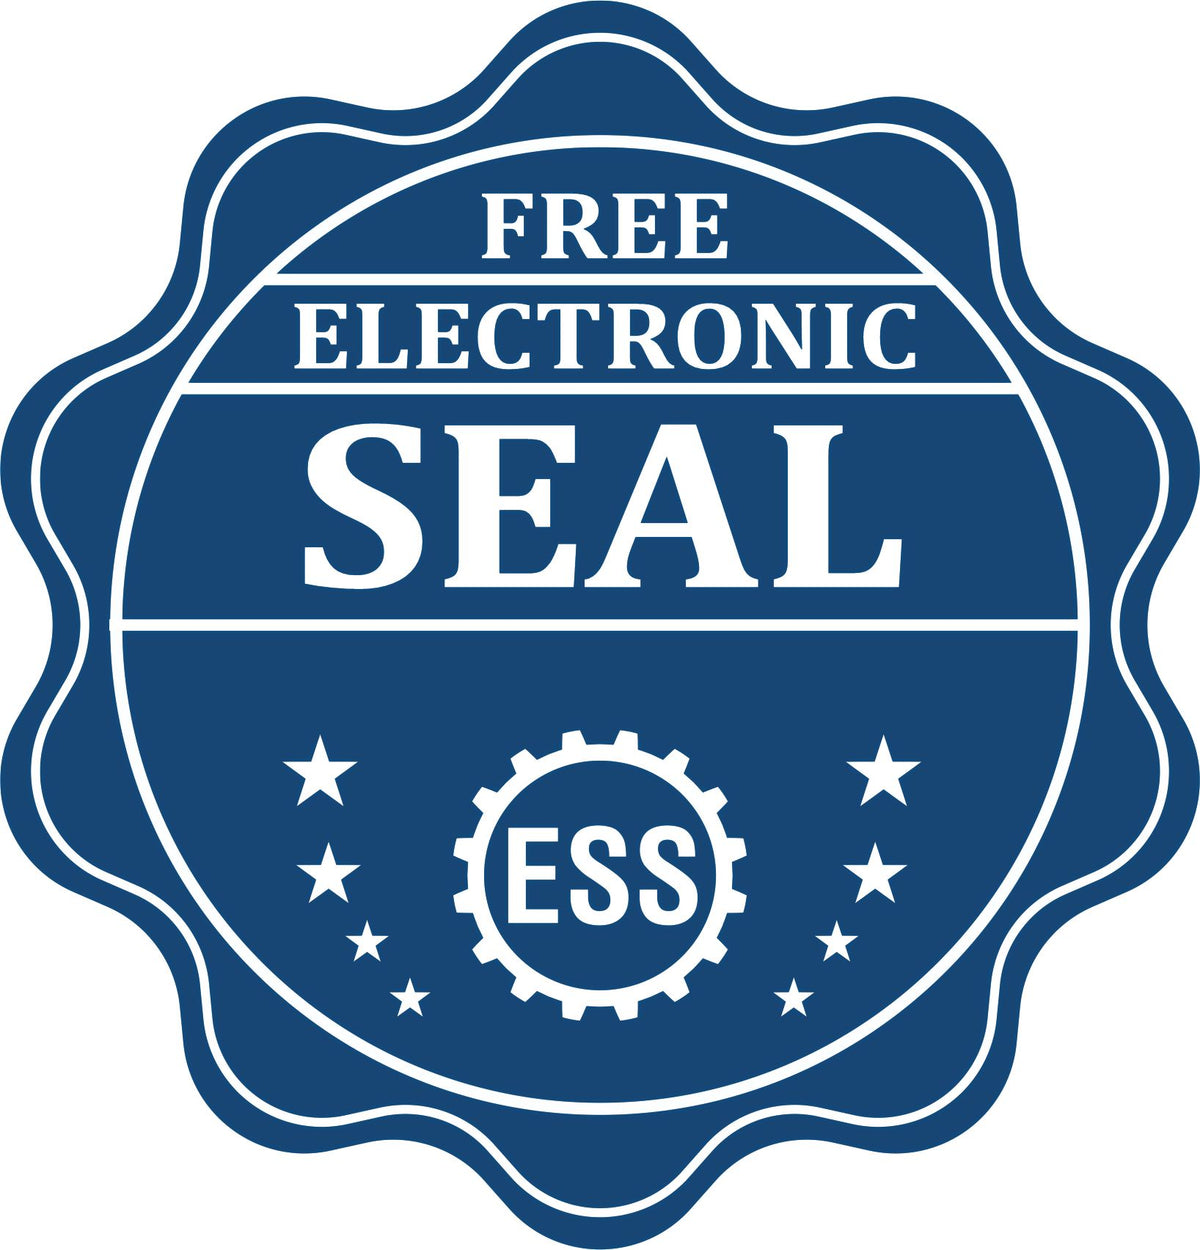 A badge showing a free electronic seal for the Gift Alabama Landscape Architect Seal with stars and the ESS gear on the emblem.